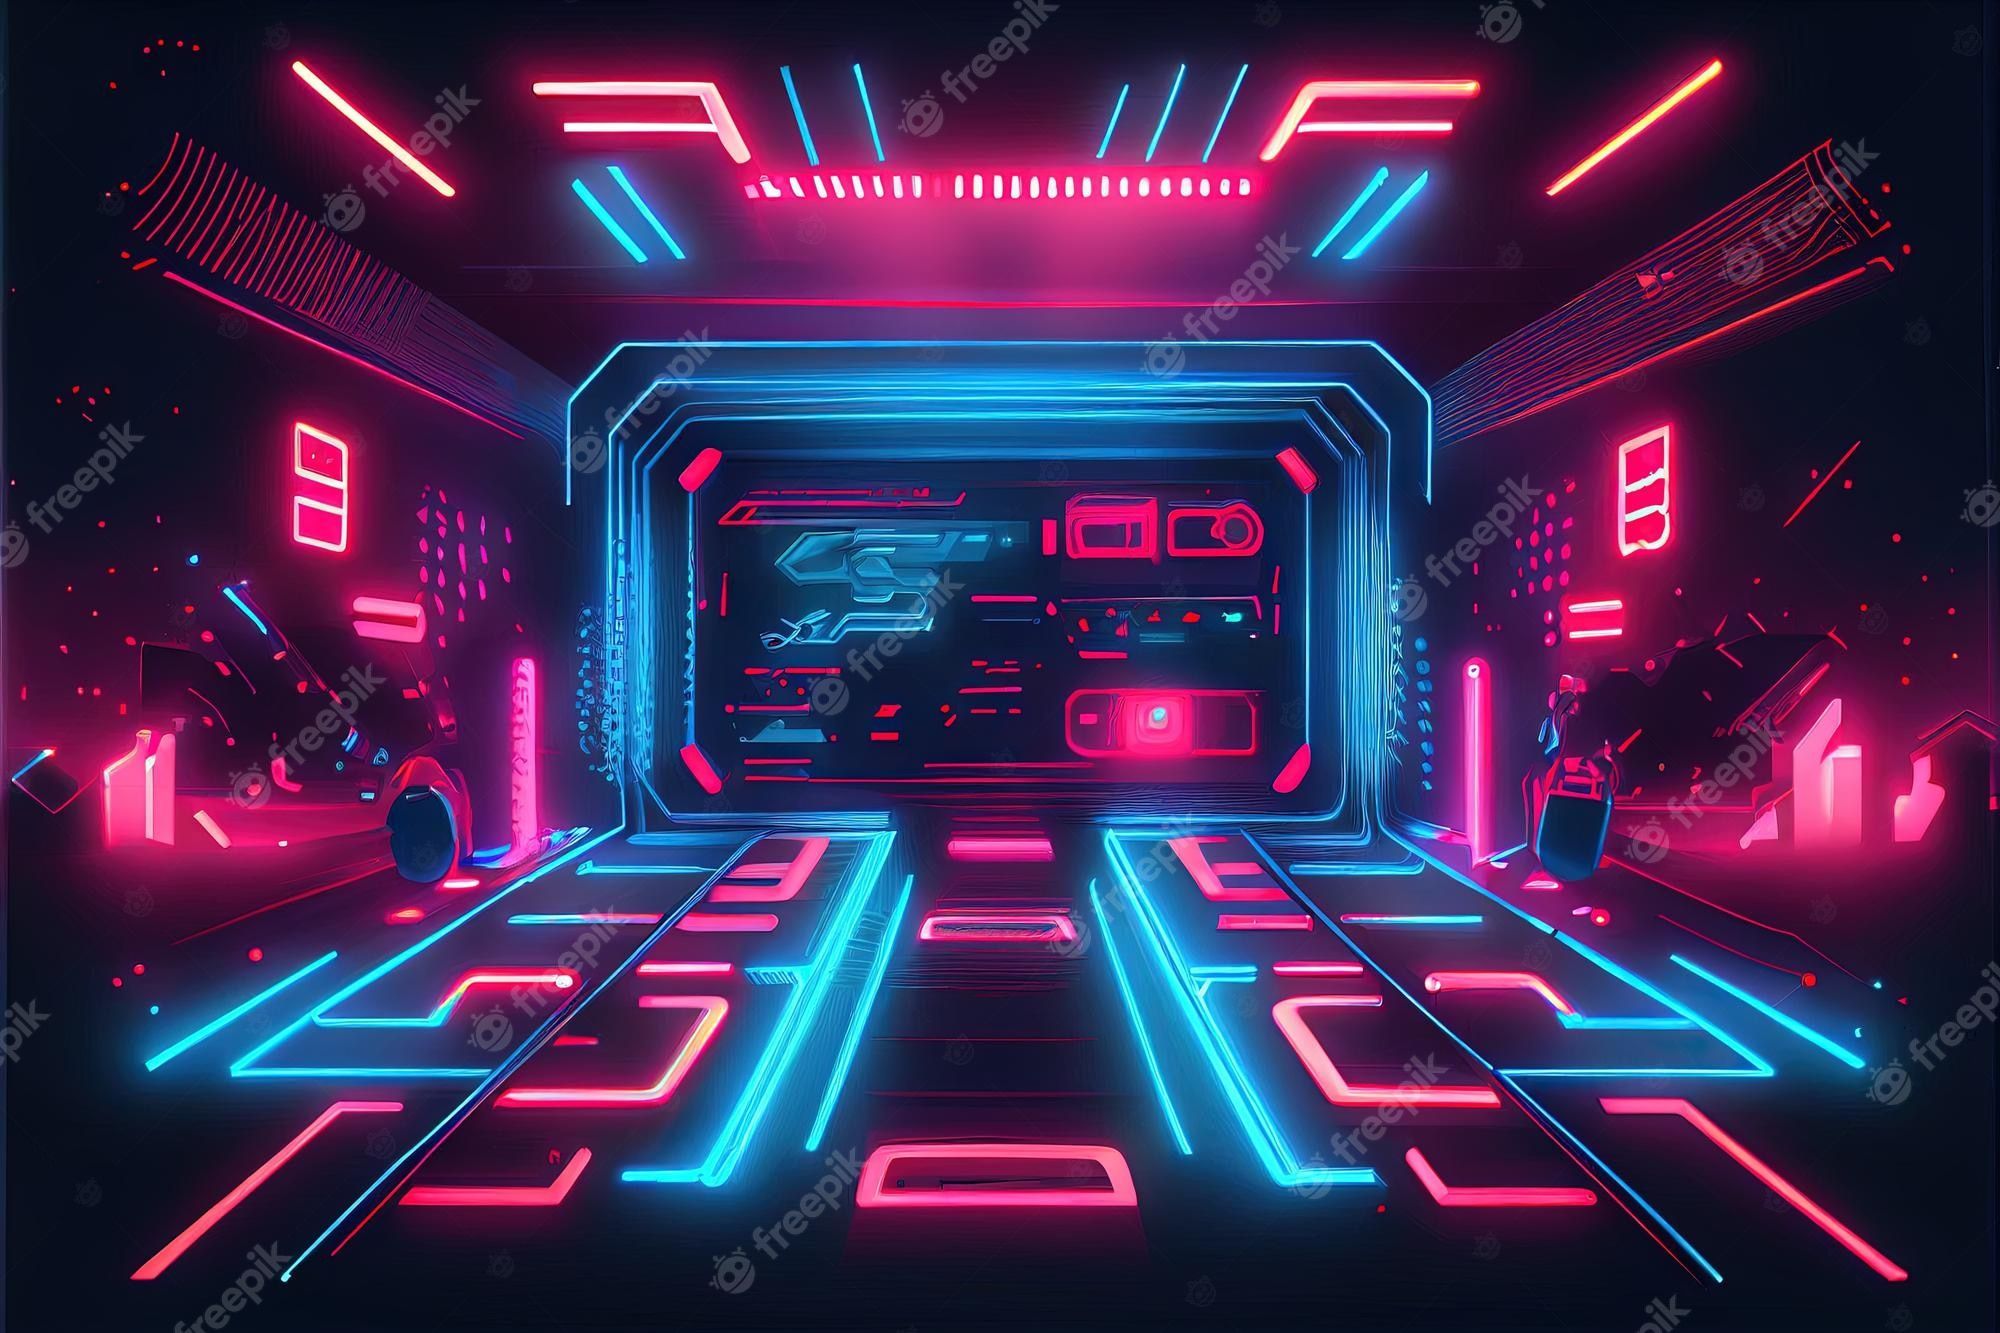 Premium Photo. Illustration of gaming background abstract cyberpunk style of gamer wallpaper neon glow light of scifi fluorescent sticks digitally generated image not based on any actual scene or pattern